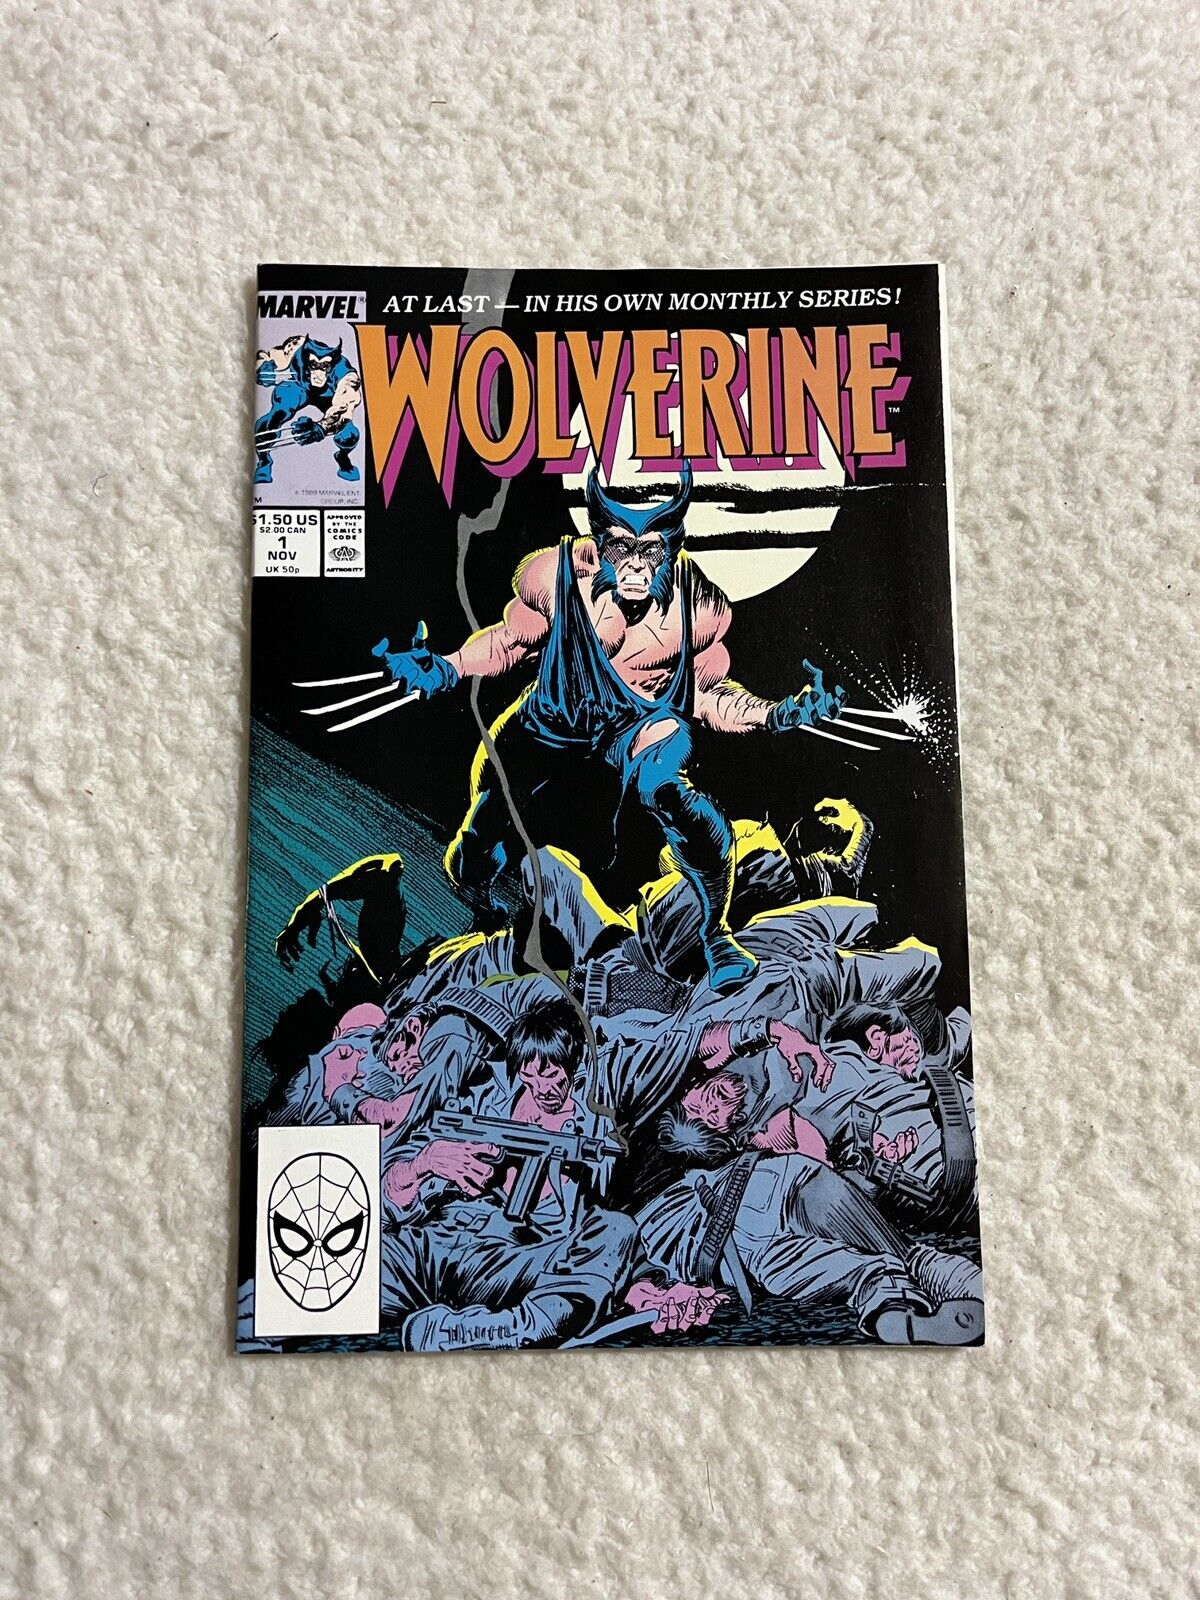 Wolverine #1 Marvel Comics 1988 First Appearance Of Patch